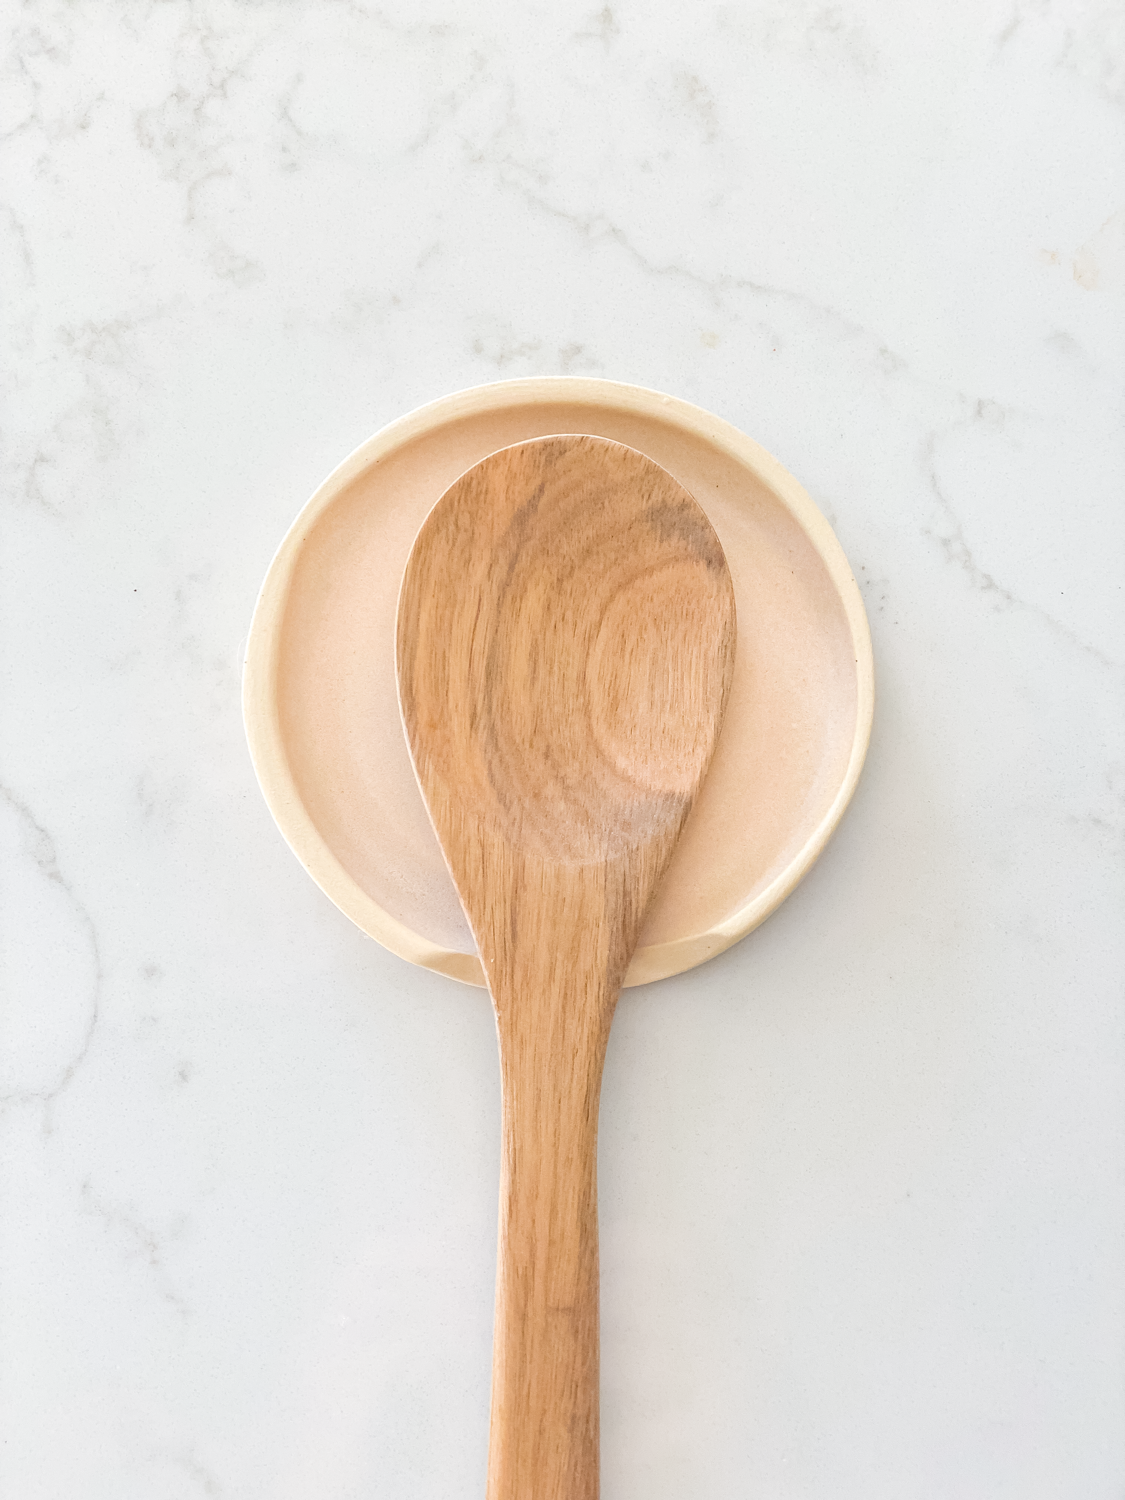 Coral spoon rest with wooden spoon on top of it